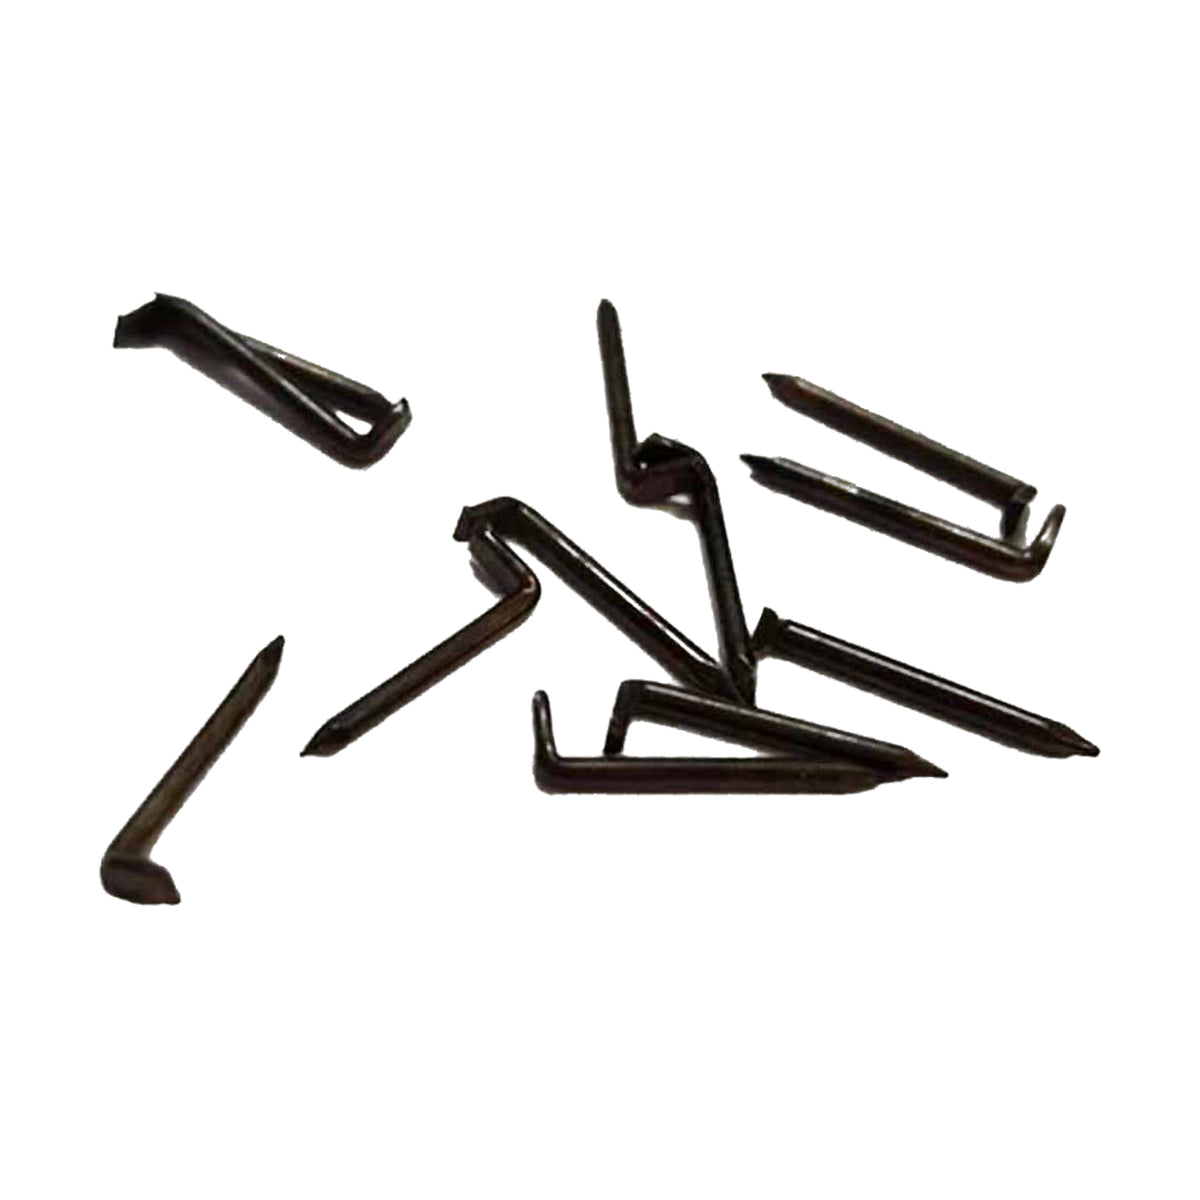 Deering 5th String Banjo Spikes Capo 12 pack